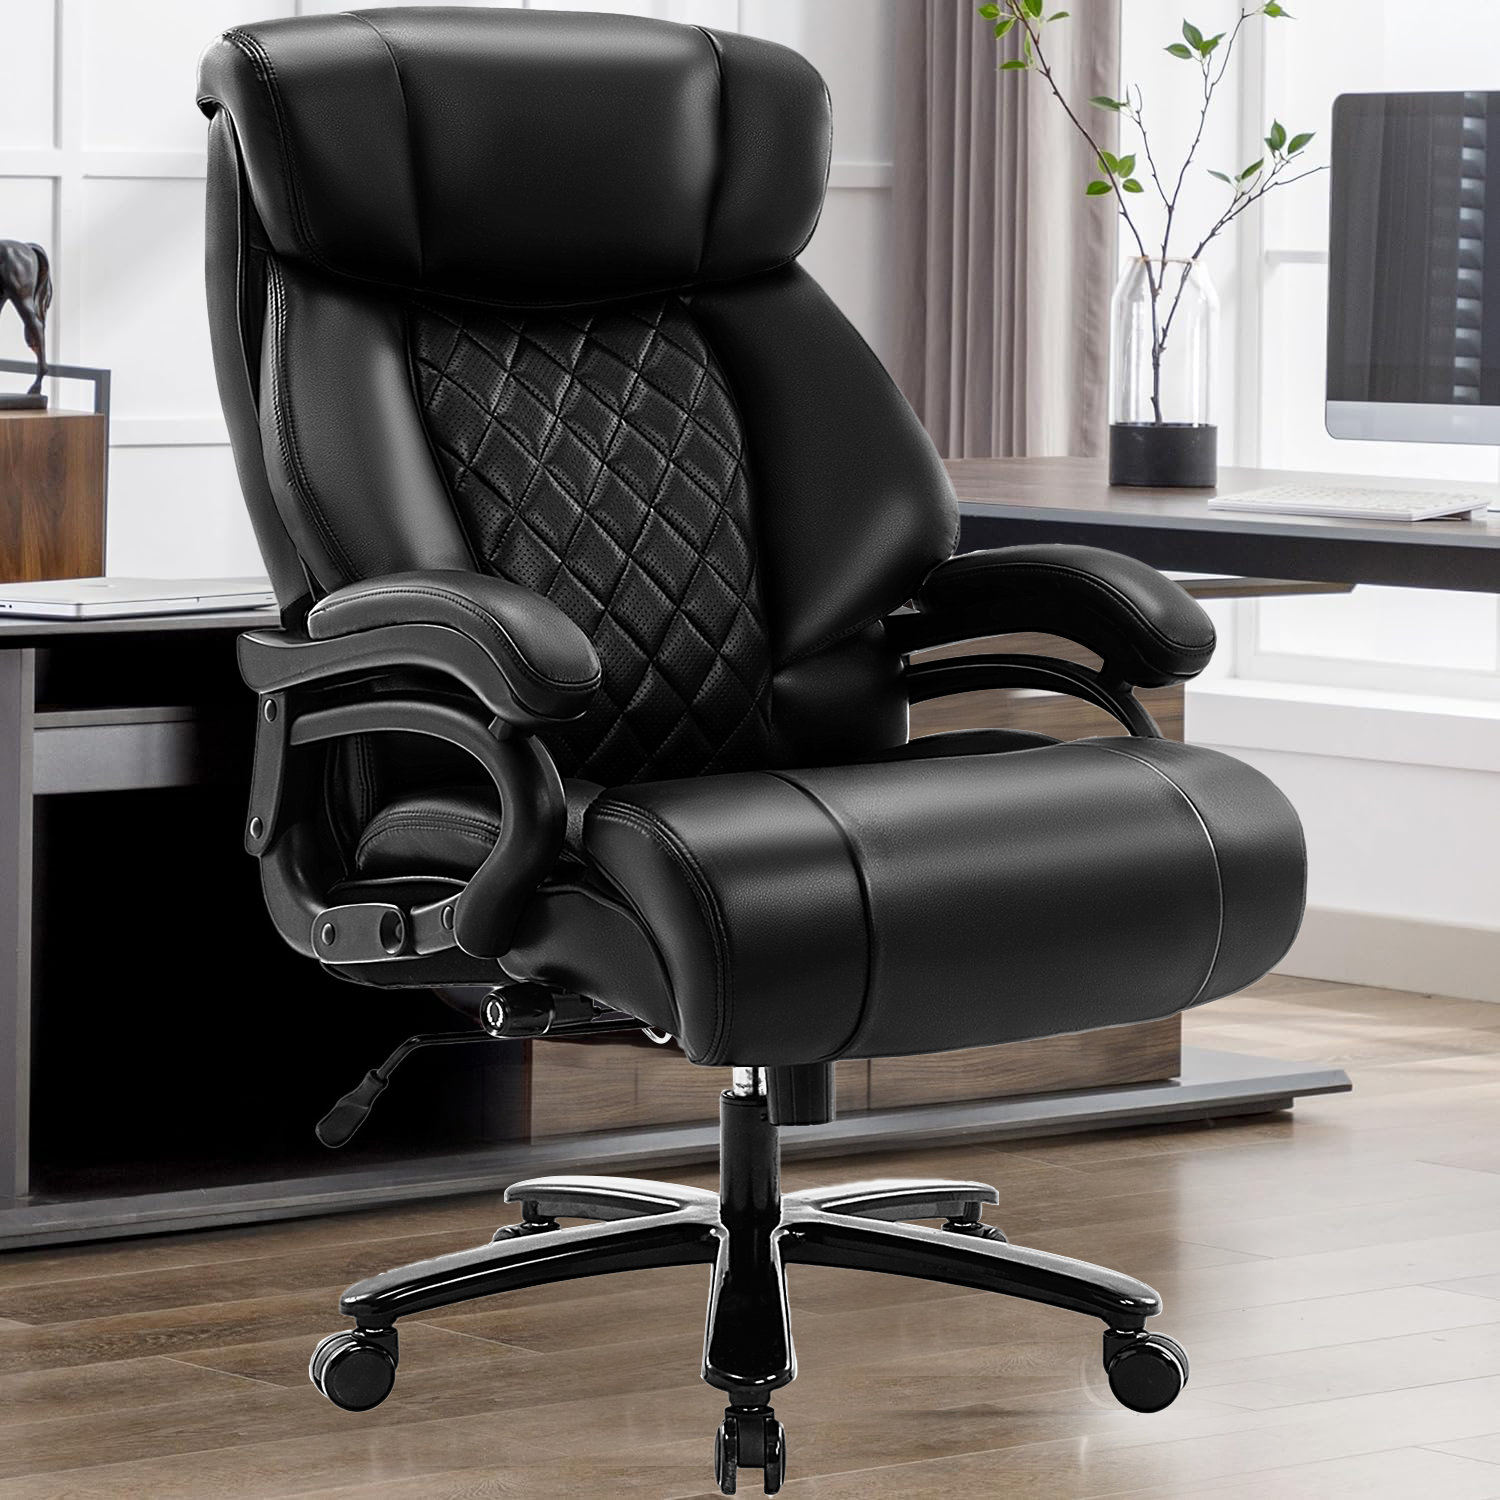 Heavy Duty Executive Office Chair, 400lbs Big and Tall Leather Office Chair for Heavy People, High Back Ergonomic Computer Desk Chair with Tilt Rock